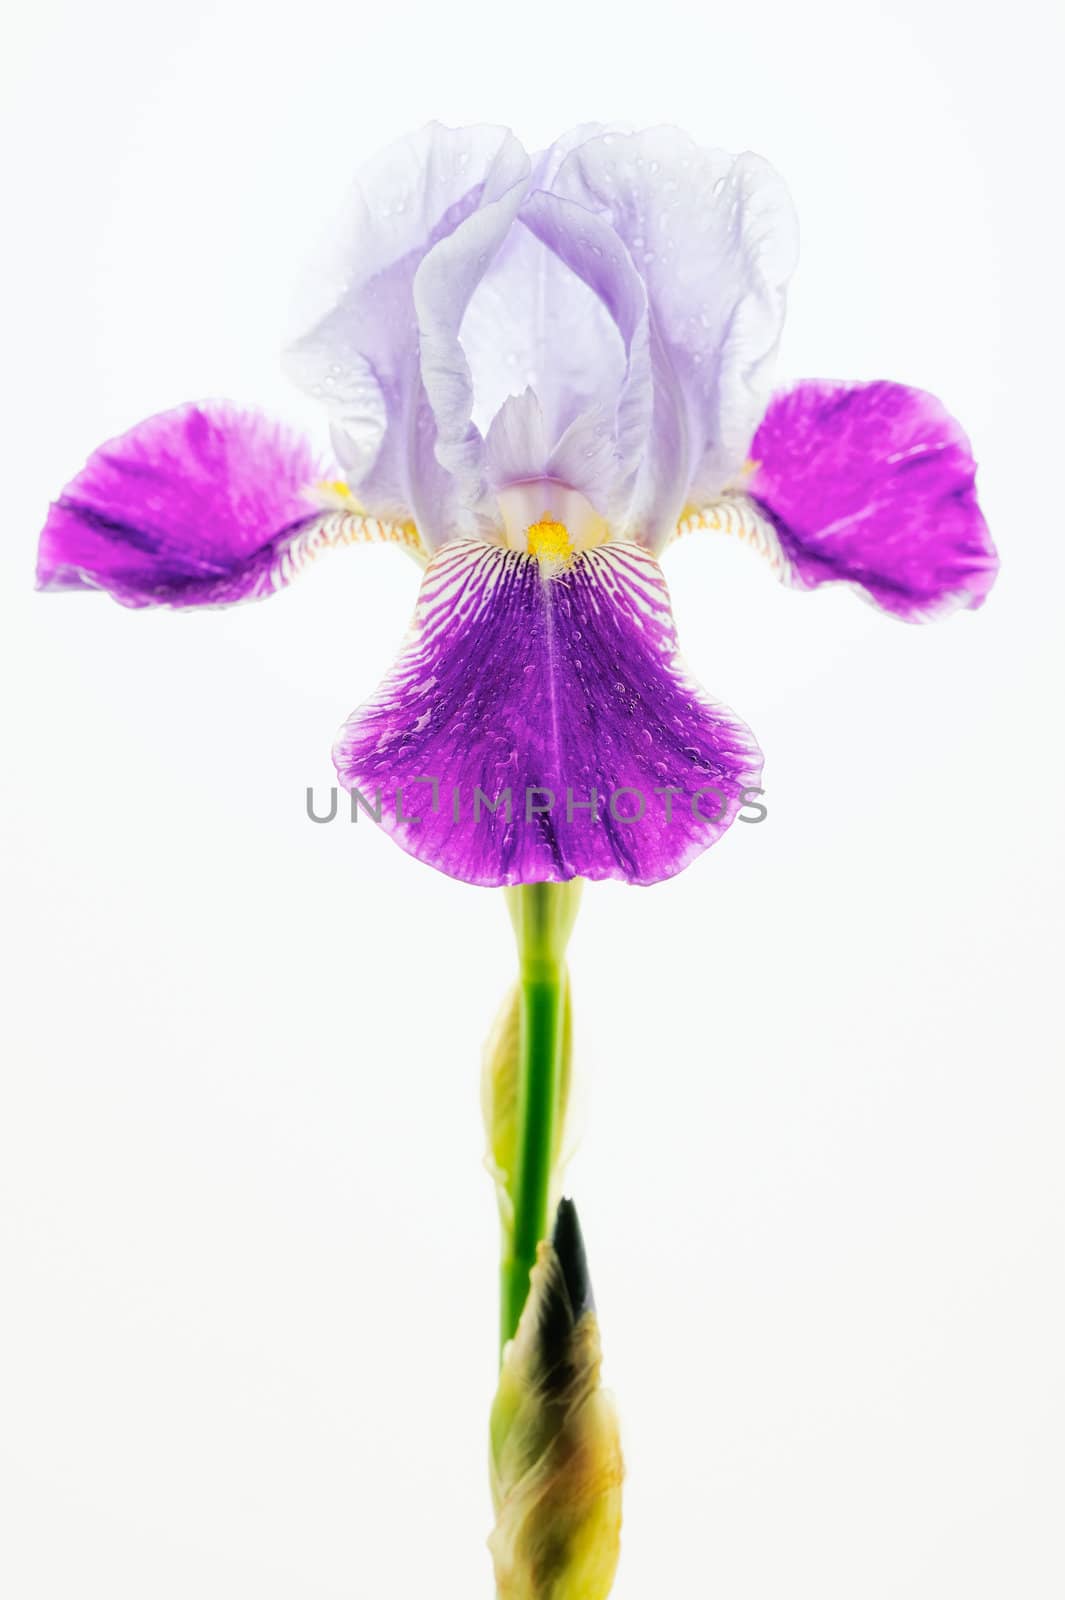 Flower with violet petals on a white background